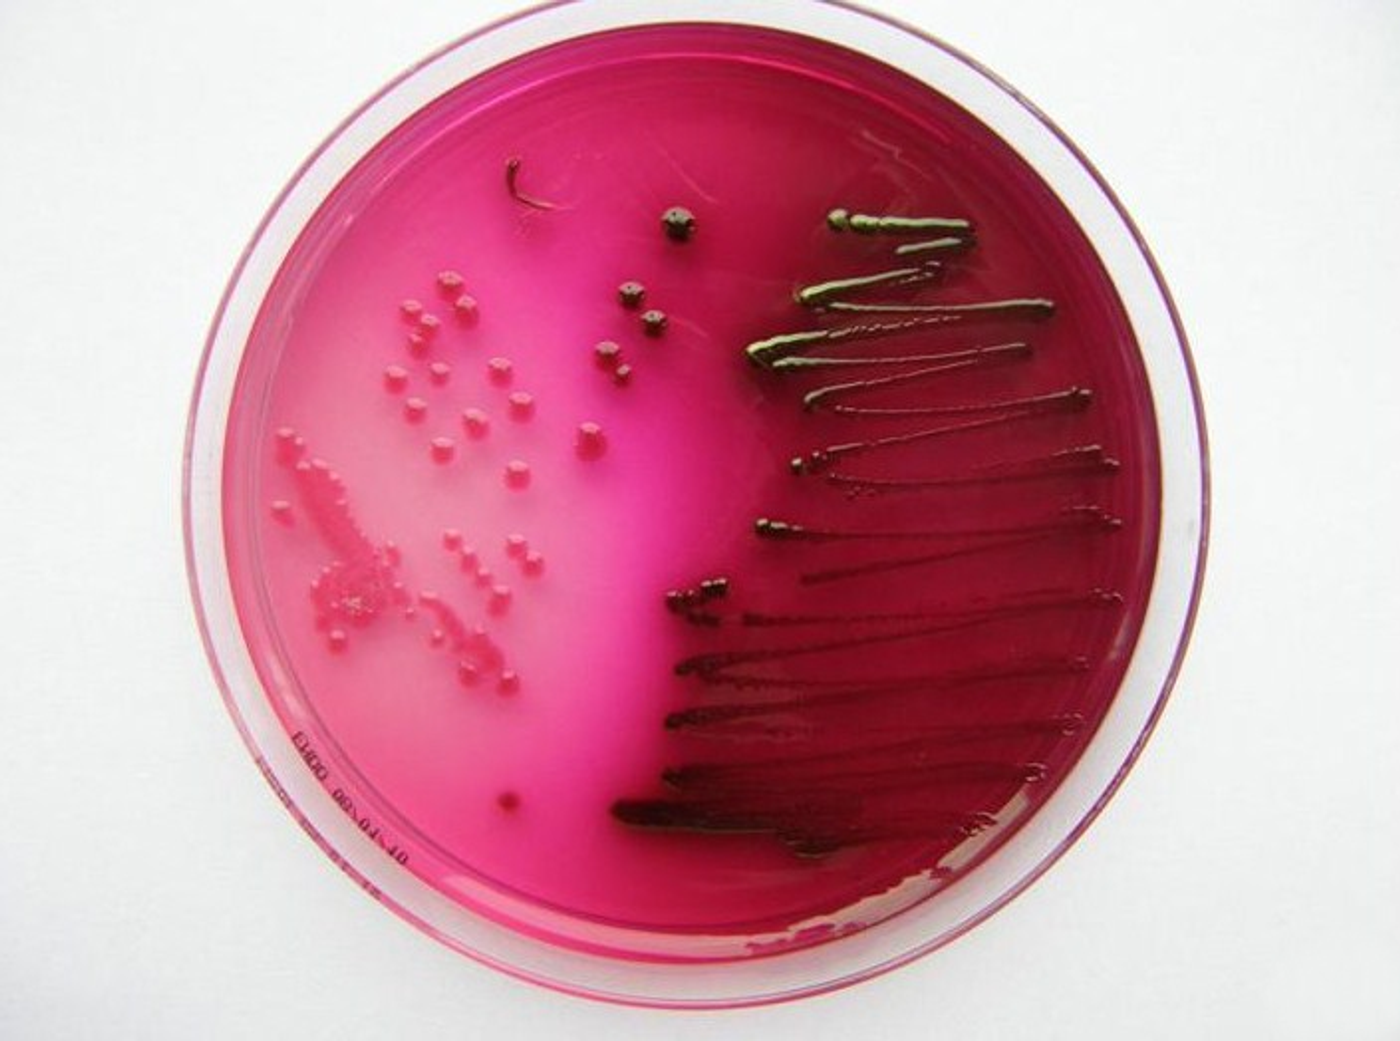 Escherichia coli, a bacterial strain used in this study. / Image credit: Wikimedia Commons/LenkaM